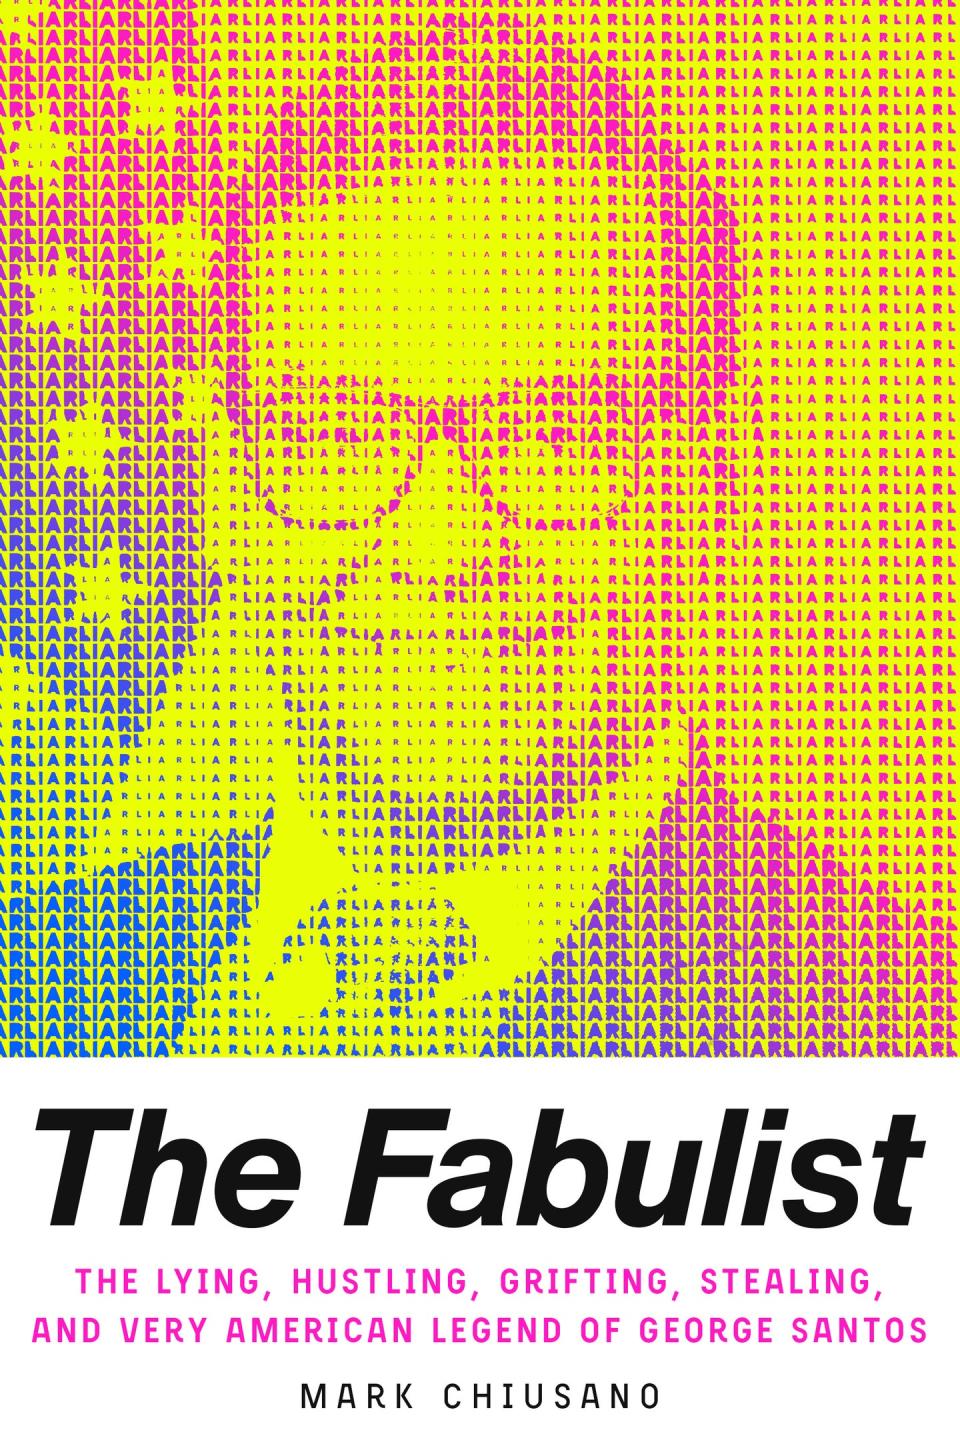 Book cover of The Fabulist.